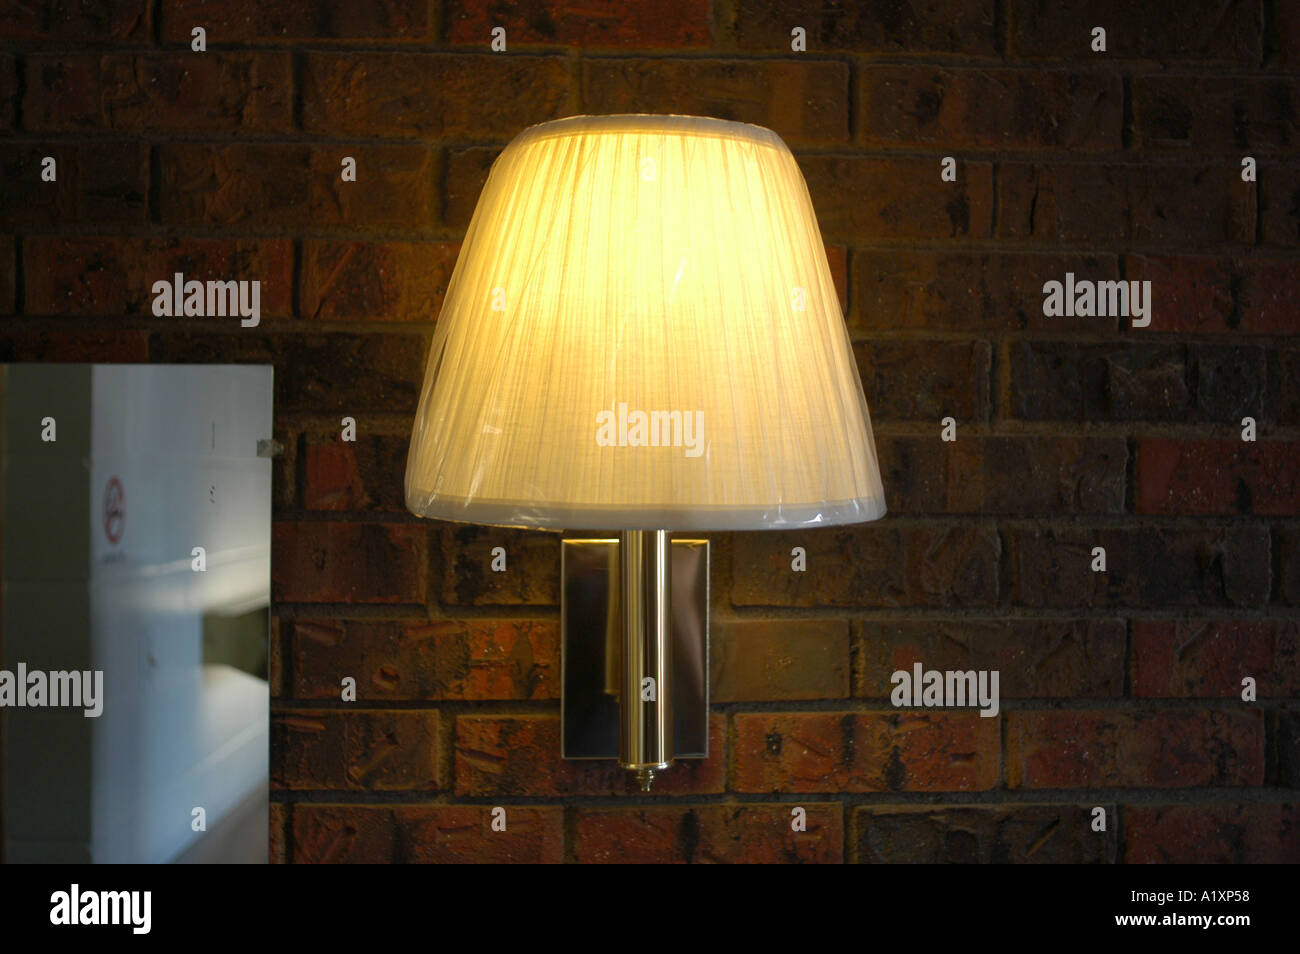 Plastic wrapping on a glowing lampshade on a light stuck onto a dark brick wall in a motel room Stock Photo